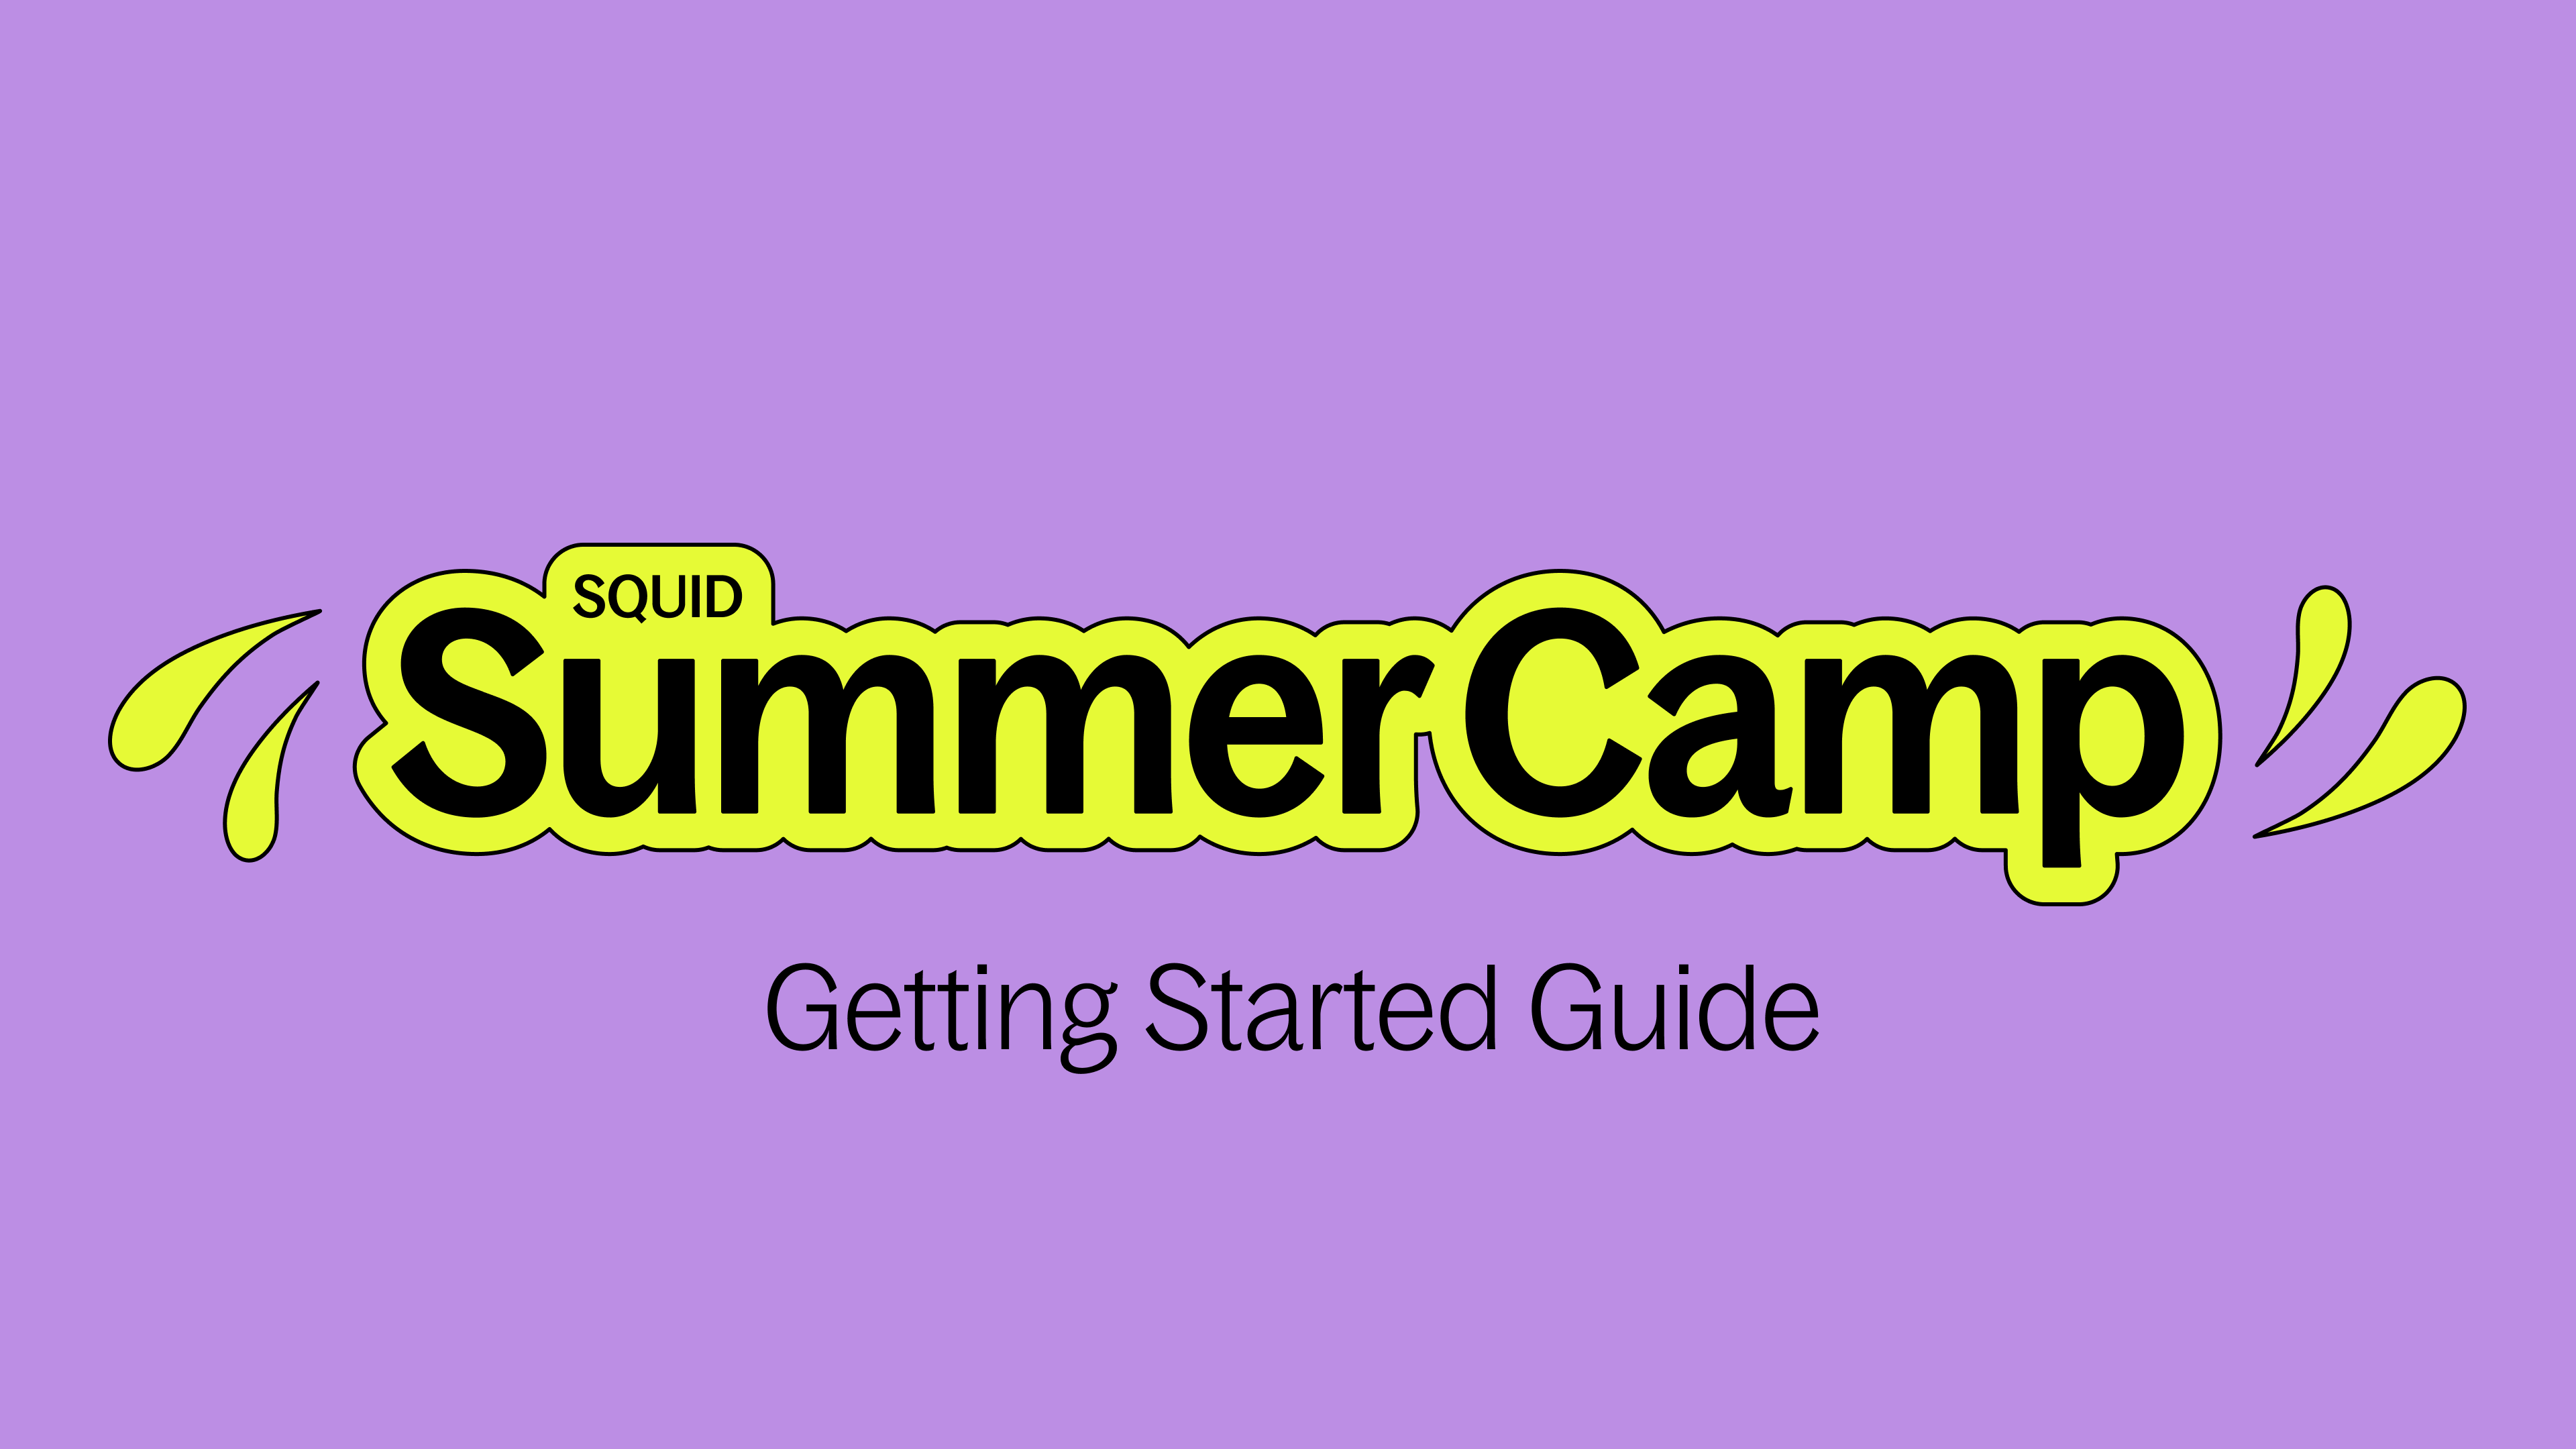 Getting Started Guide: Squid Summer Camp